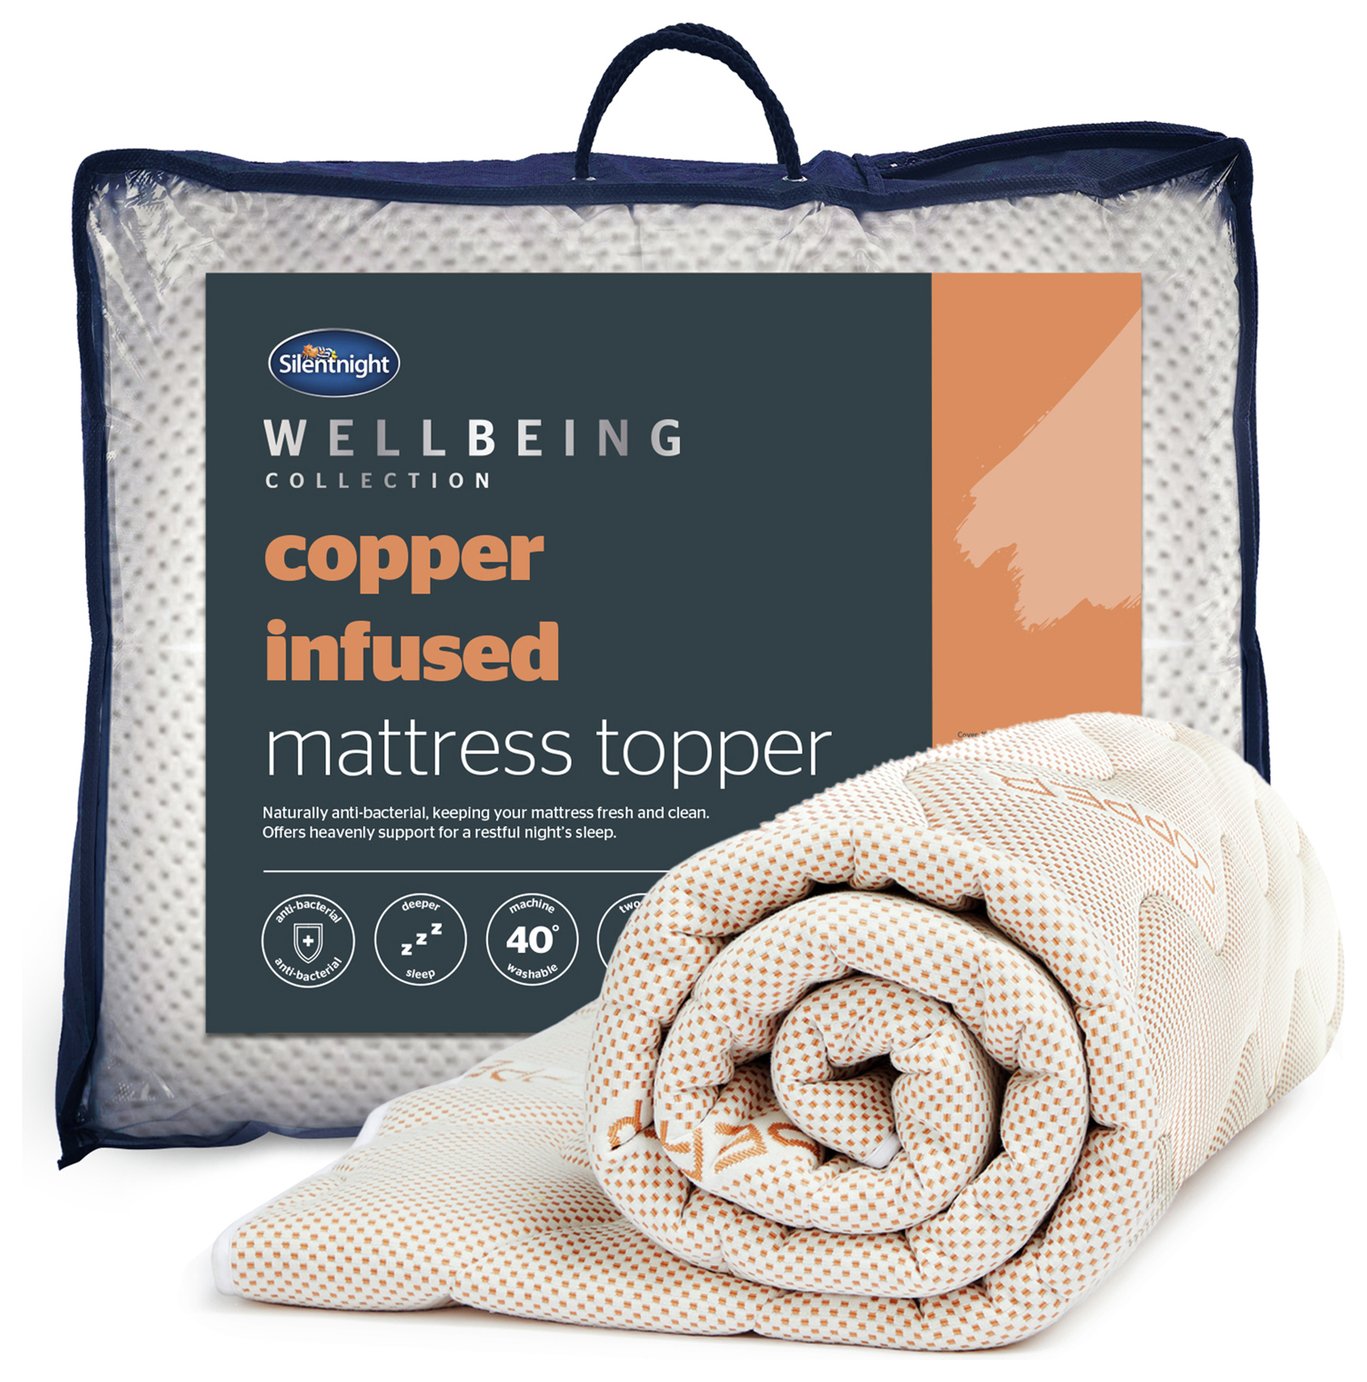 Silentnight Wellbeing Copper Infused Mattress Topper- Single